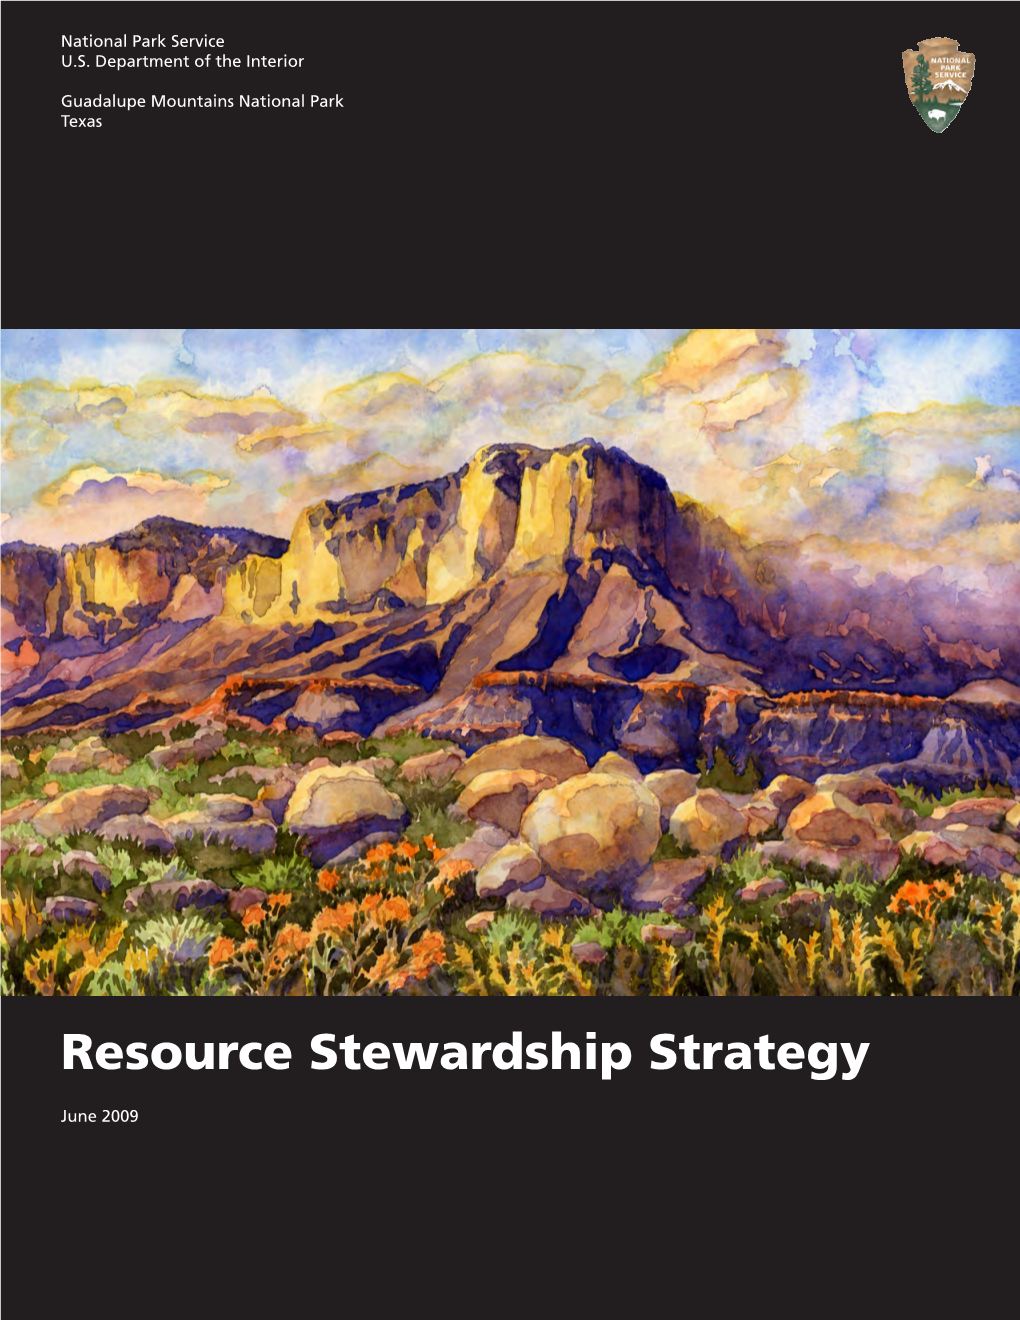 Resource Stewardship Strategy (RSS) Is a Park Program Plan That Includes Strategies for Managing Natural and Cultural Resources